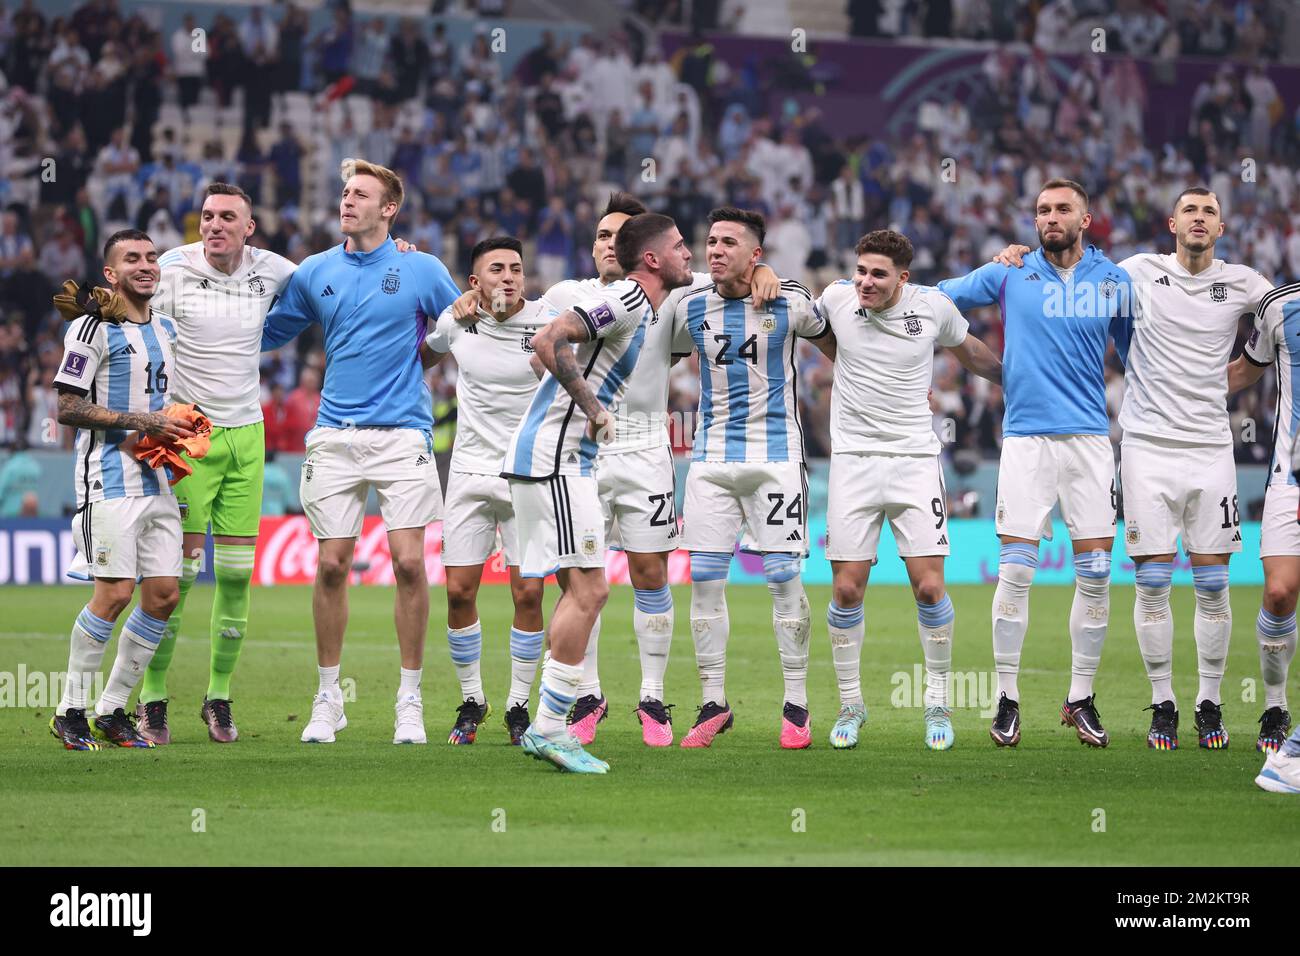 LUSAIL STADIUM, QATAR - DECEMBER 13: Argentinian team celebrating after the FIFA World Cup Qatar 2022 semi-final match between Croatia and Argentina at Lusail Stadium on December 13, 2022 in Qatar.  Photo: Igor Kralj/PIXSELL Stock Photo